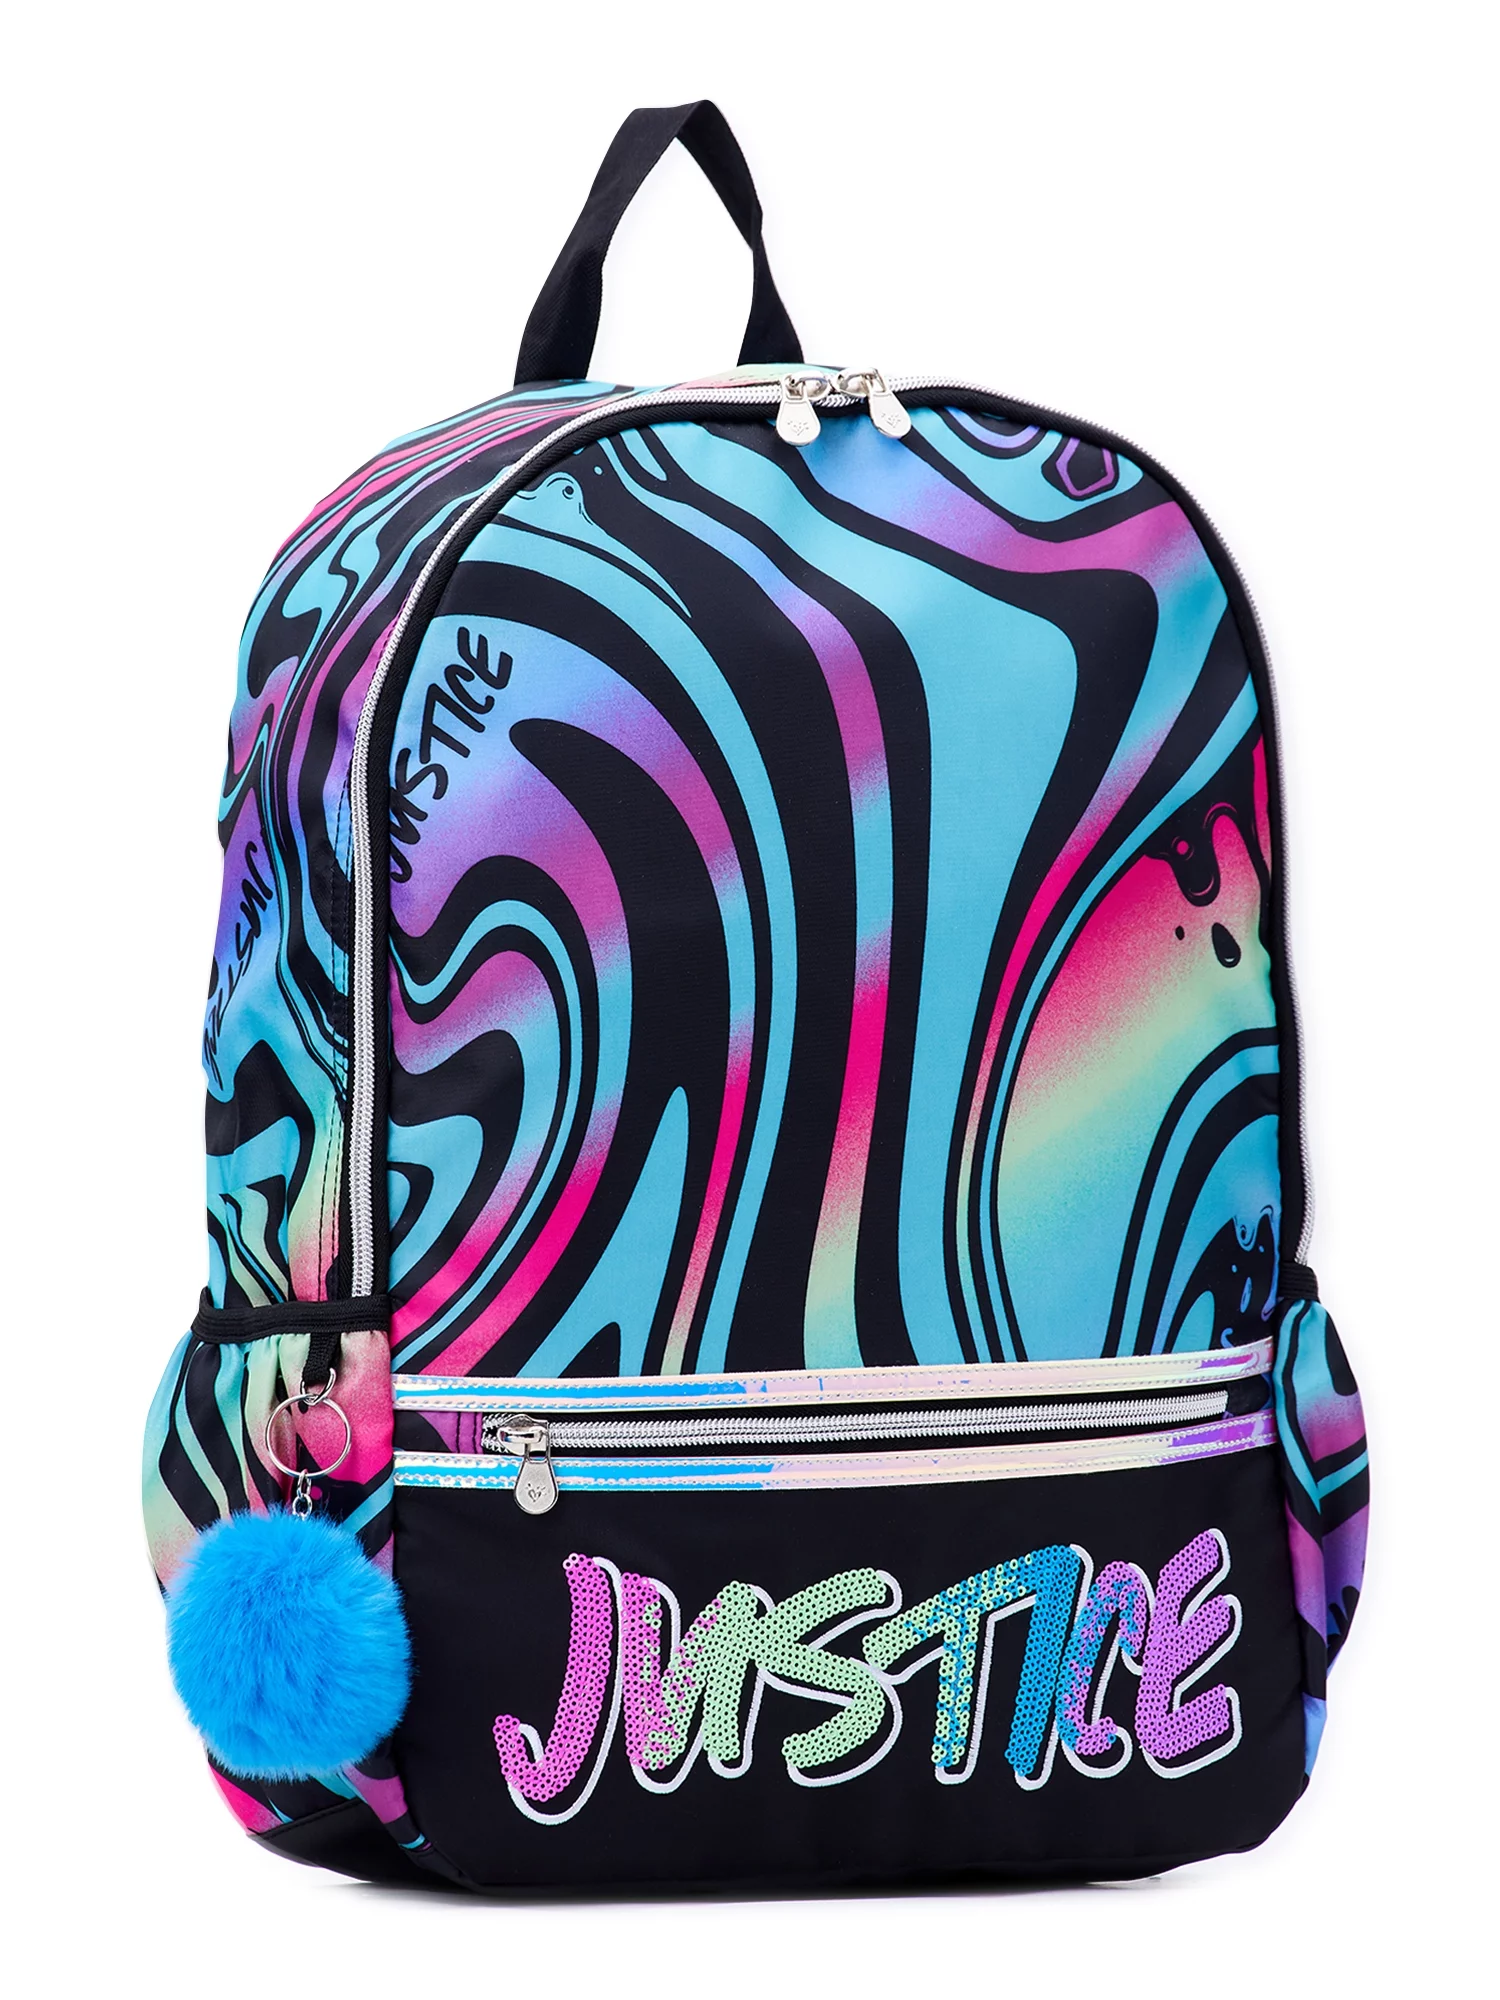 Justice Girls 17" Laptop Backpack with Pom Key Chain, Multi-Color Swirl